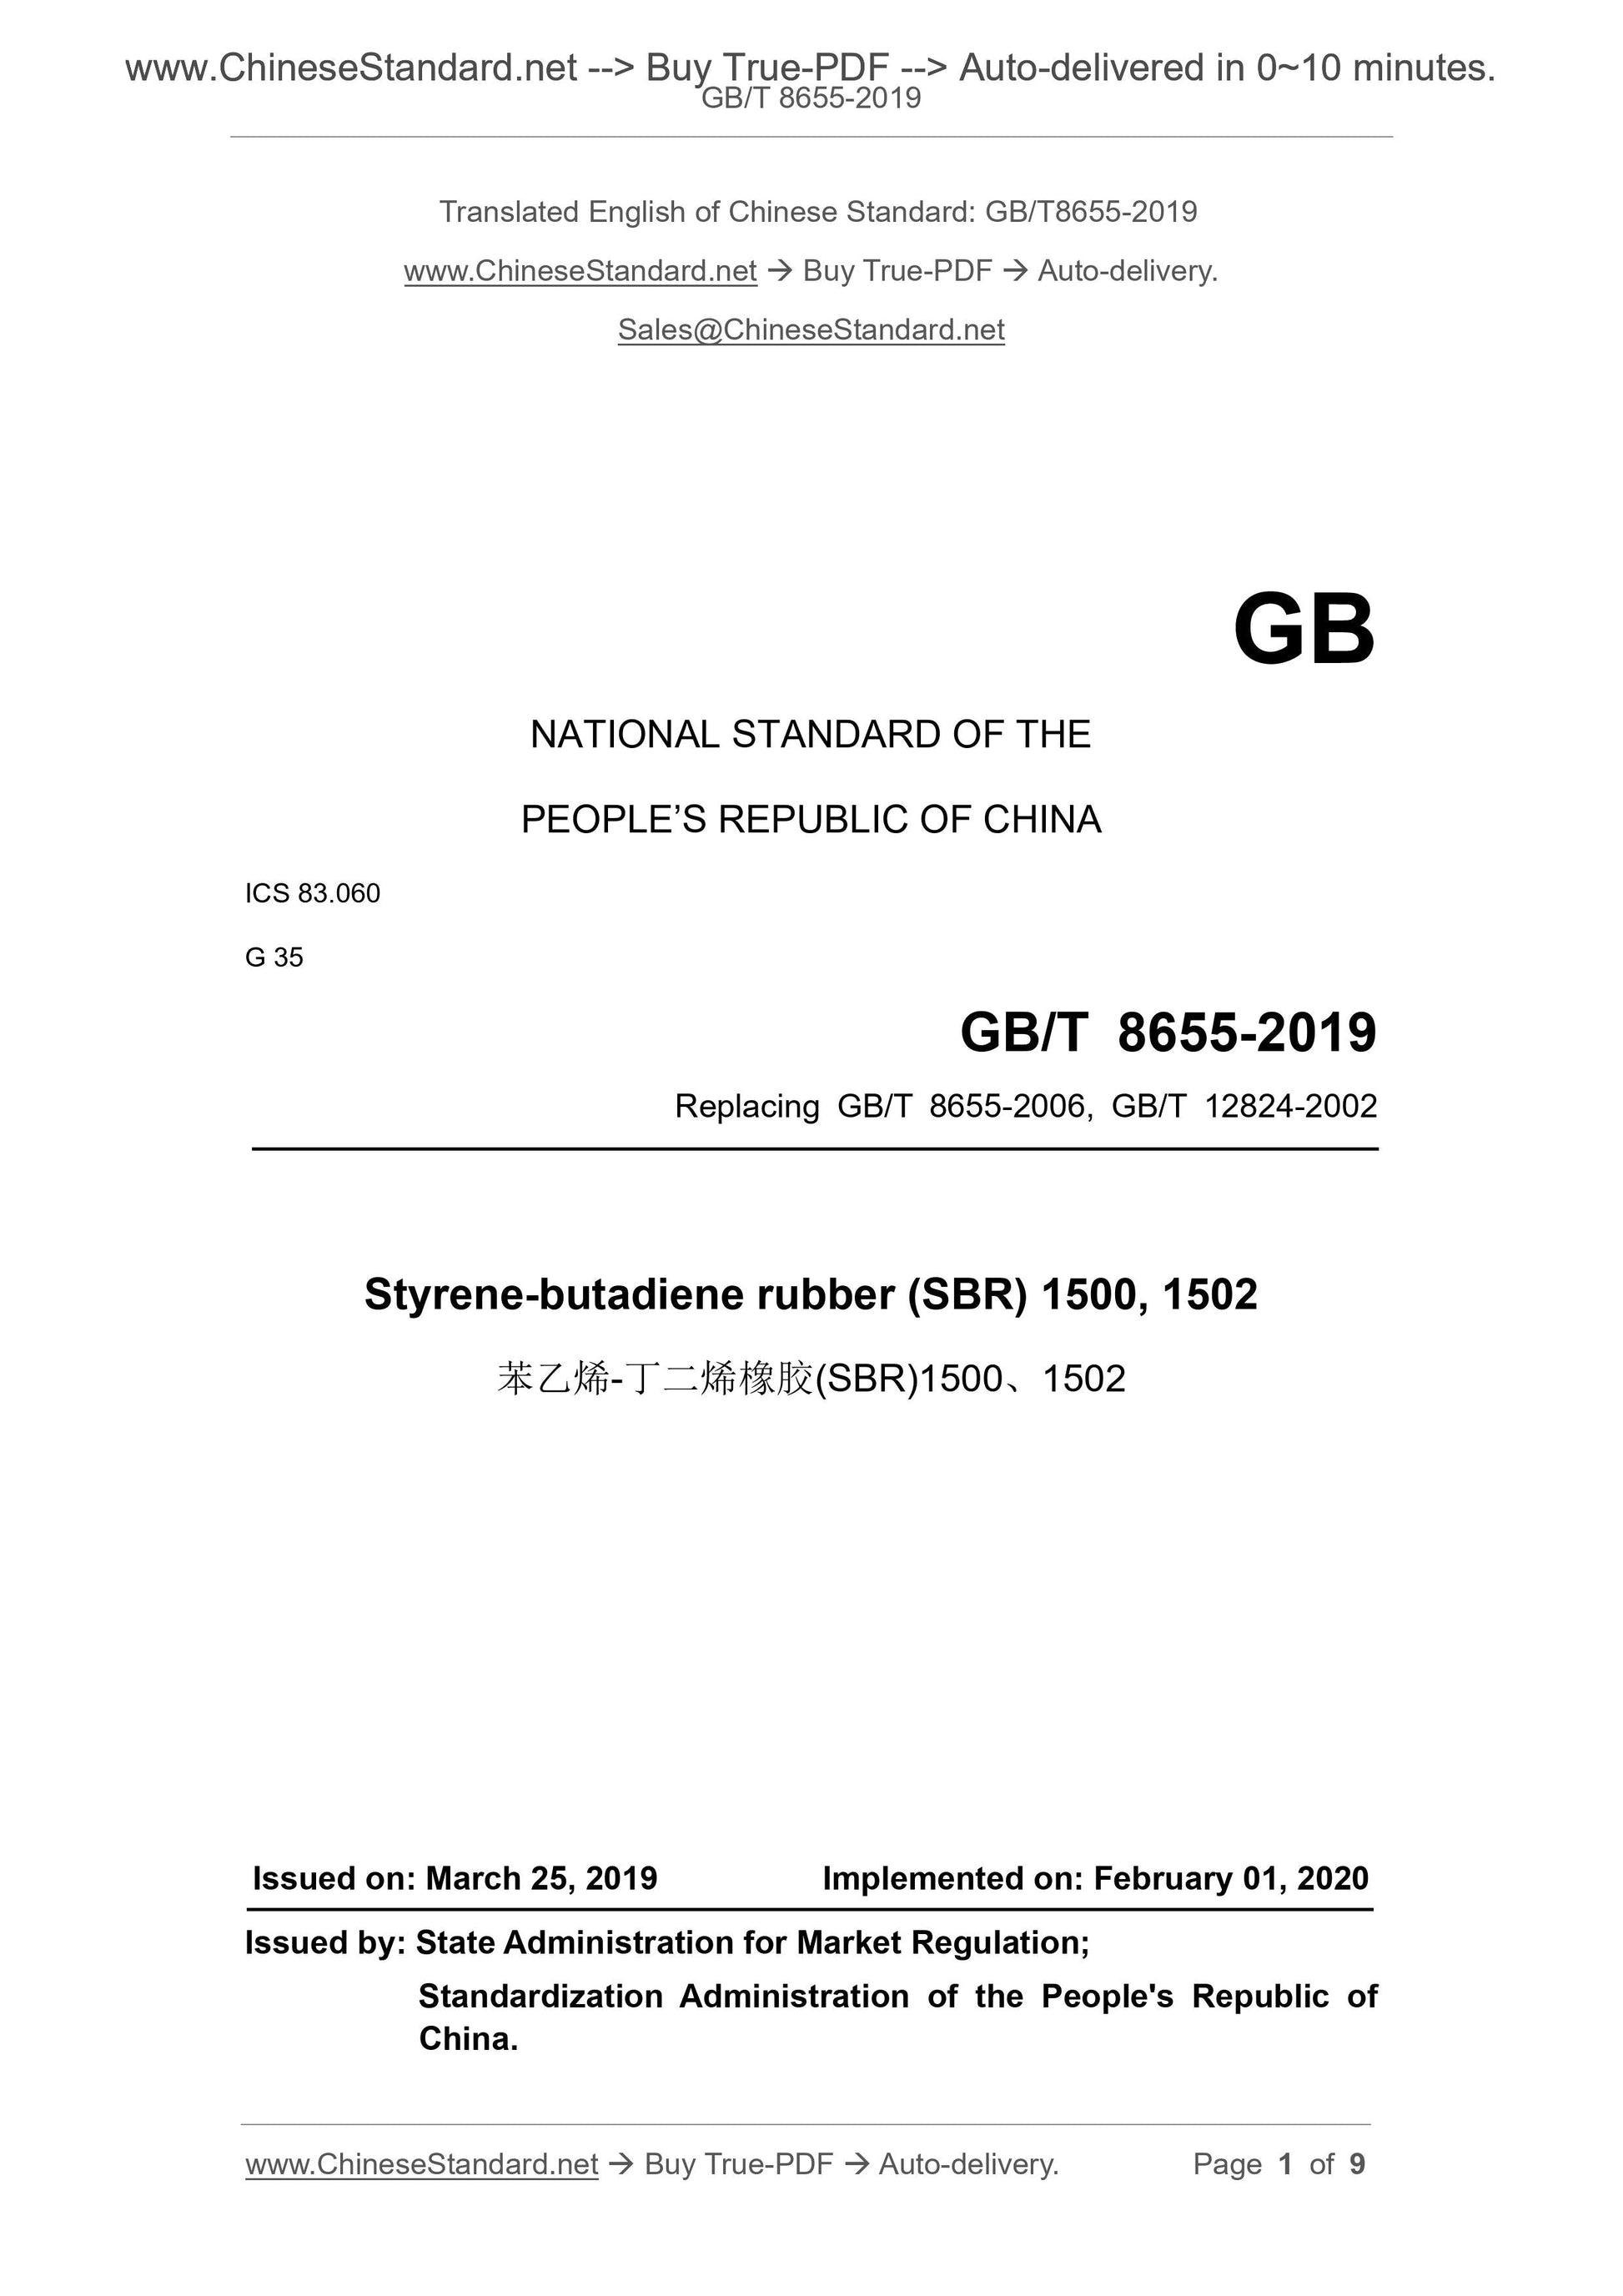 GB/T 8655-2019 Page 1